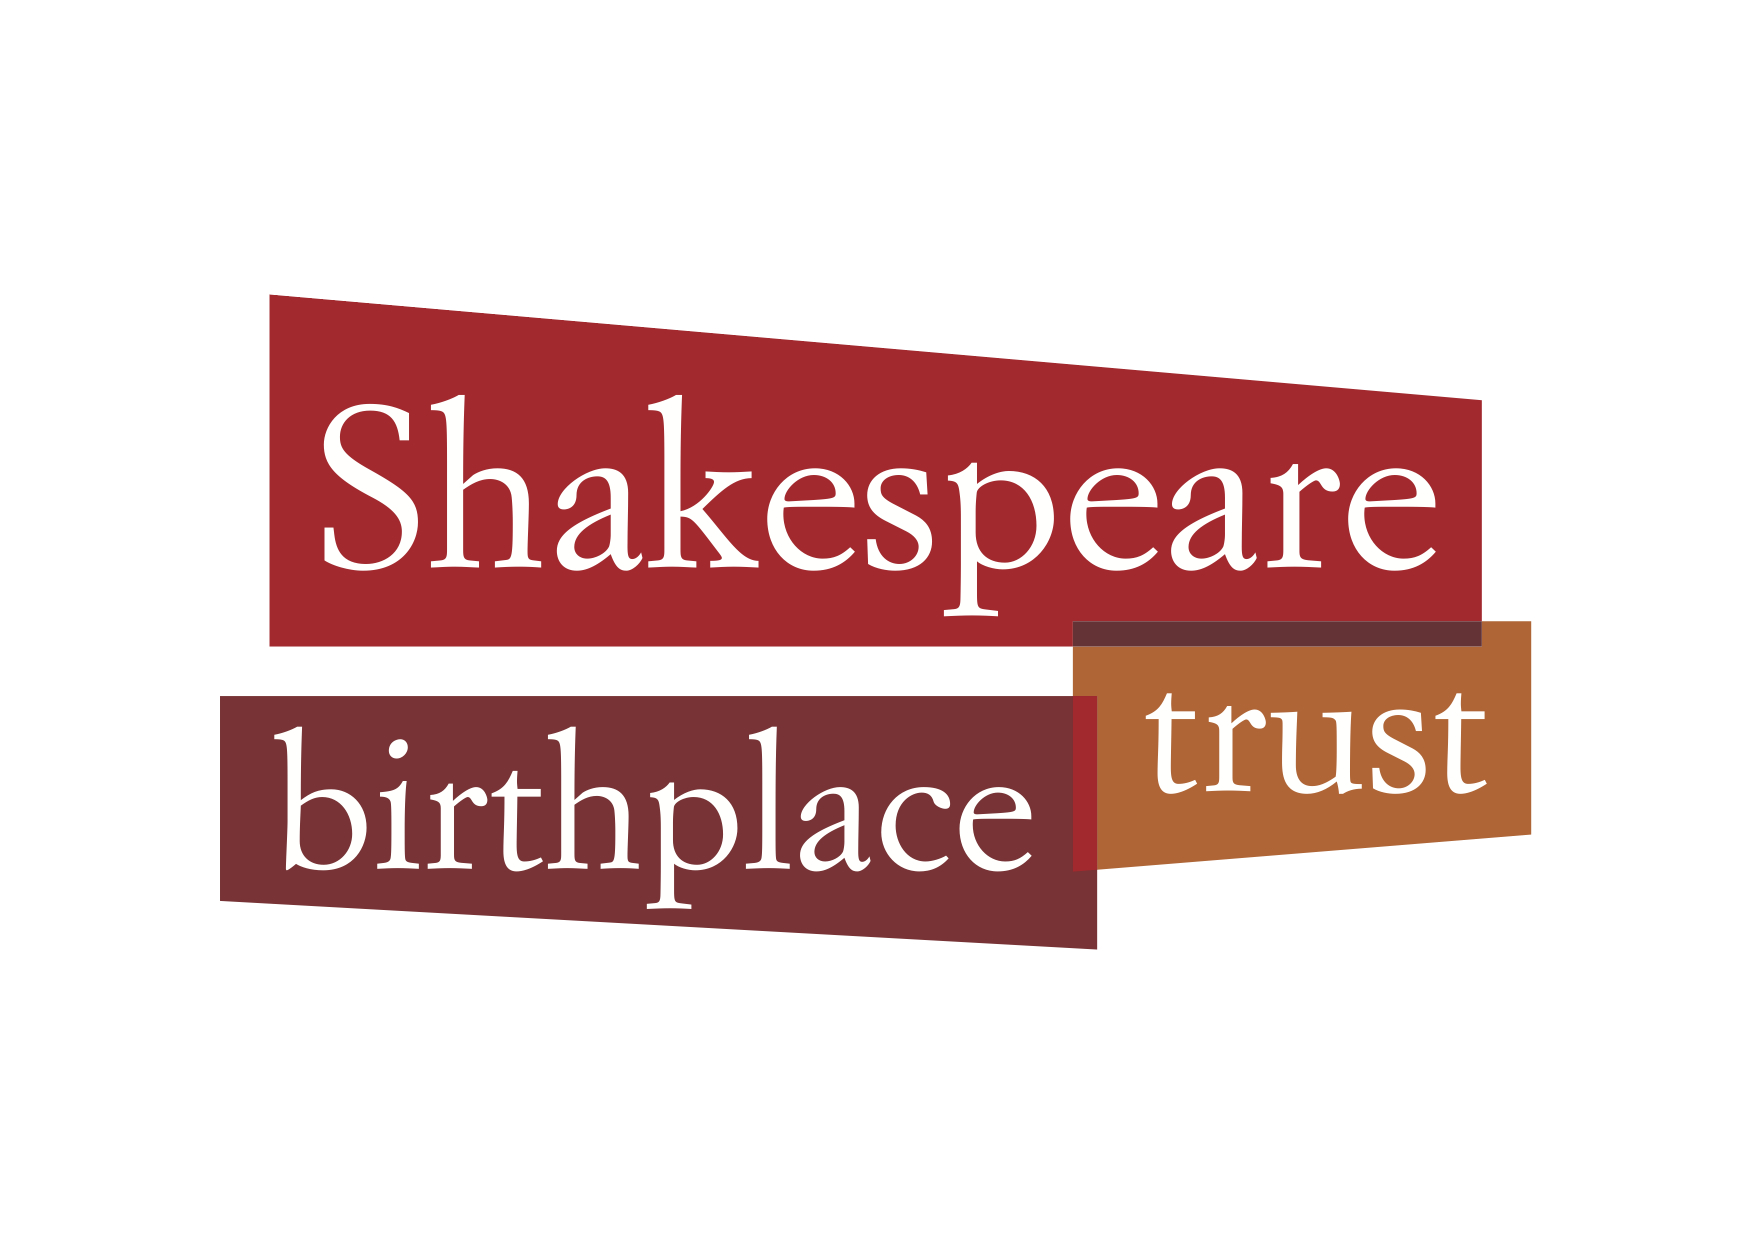 Shakespeare birthplace trust logo, white text on red and orange rectangles